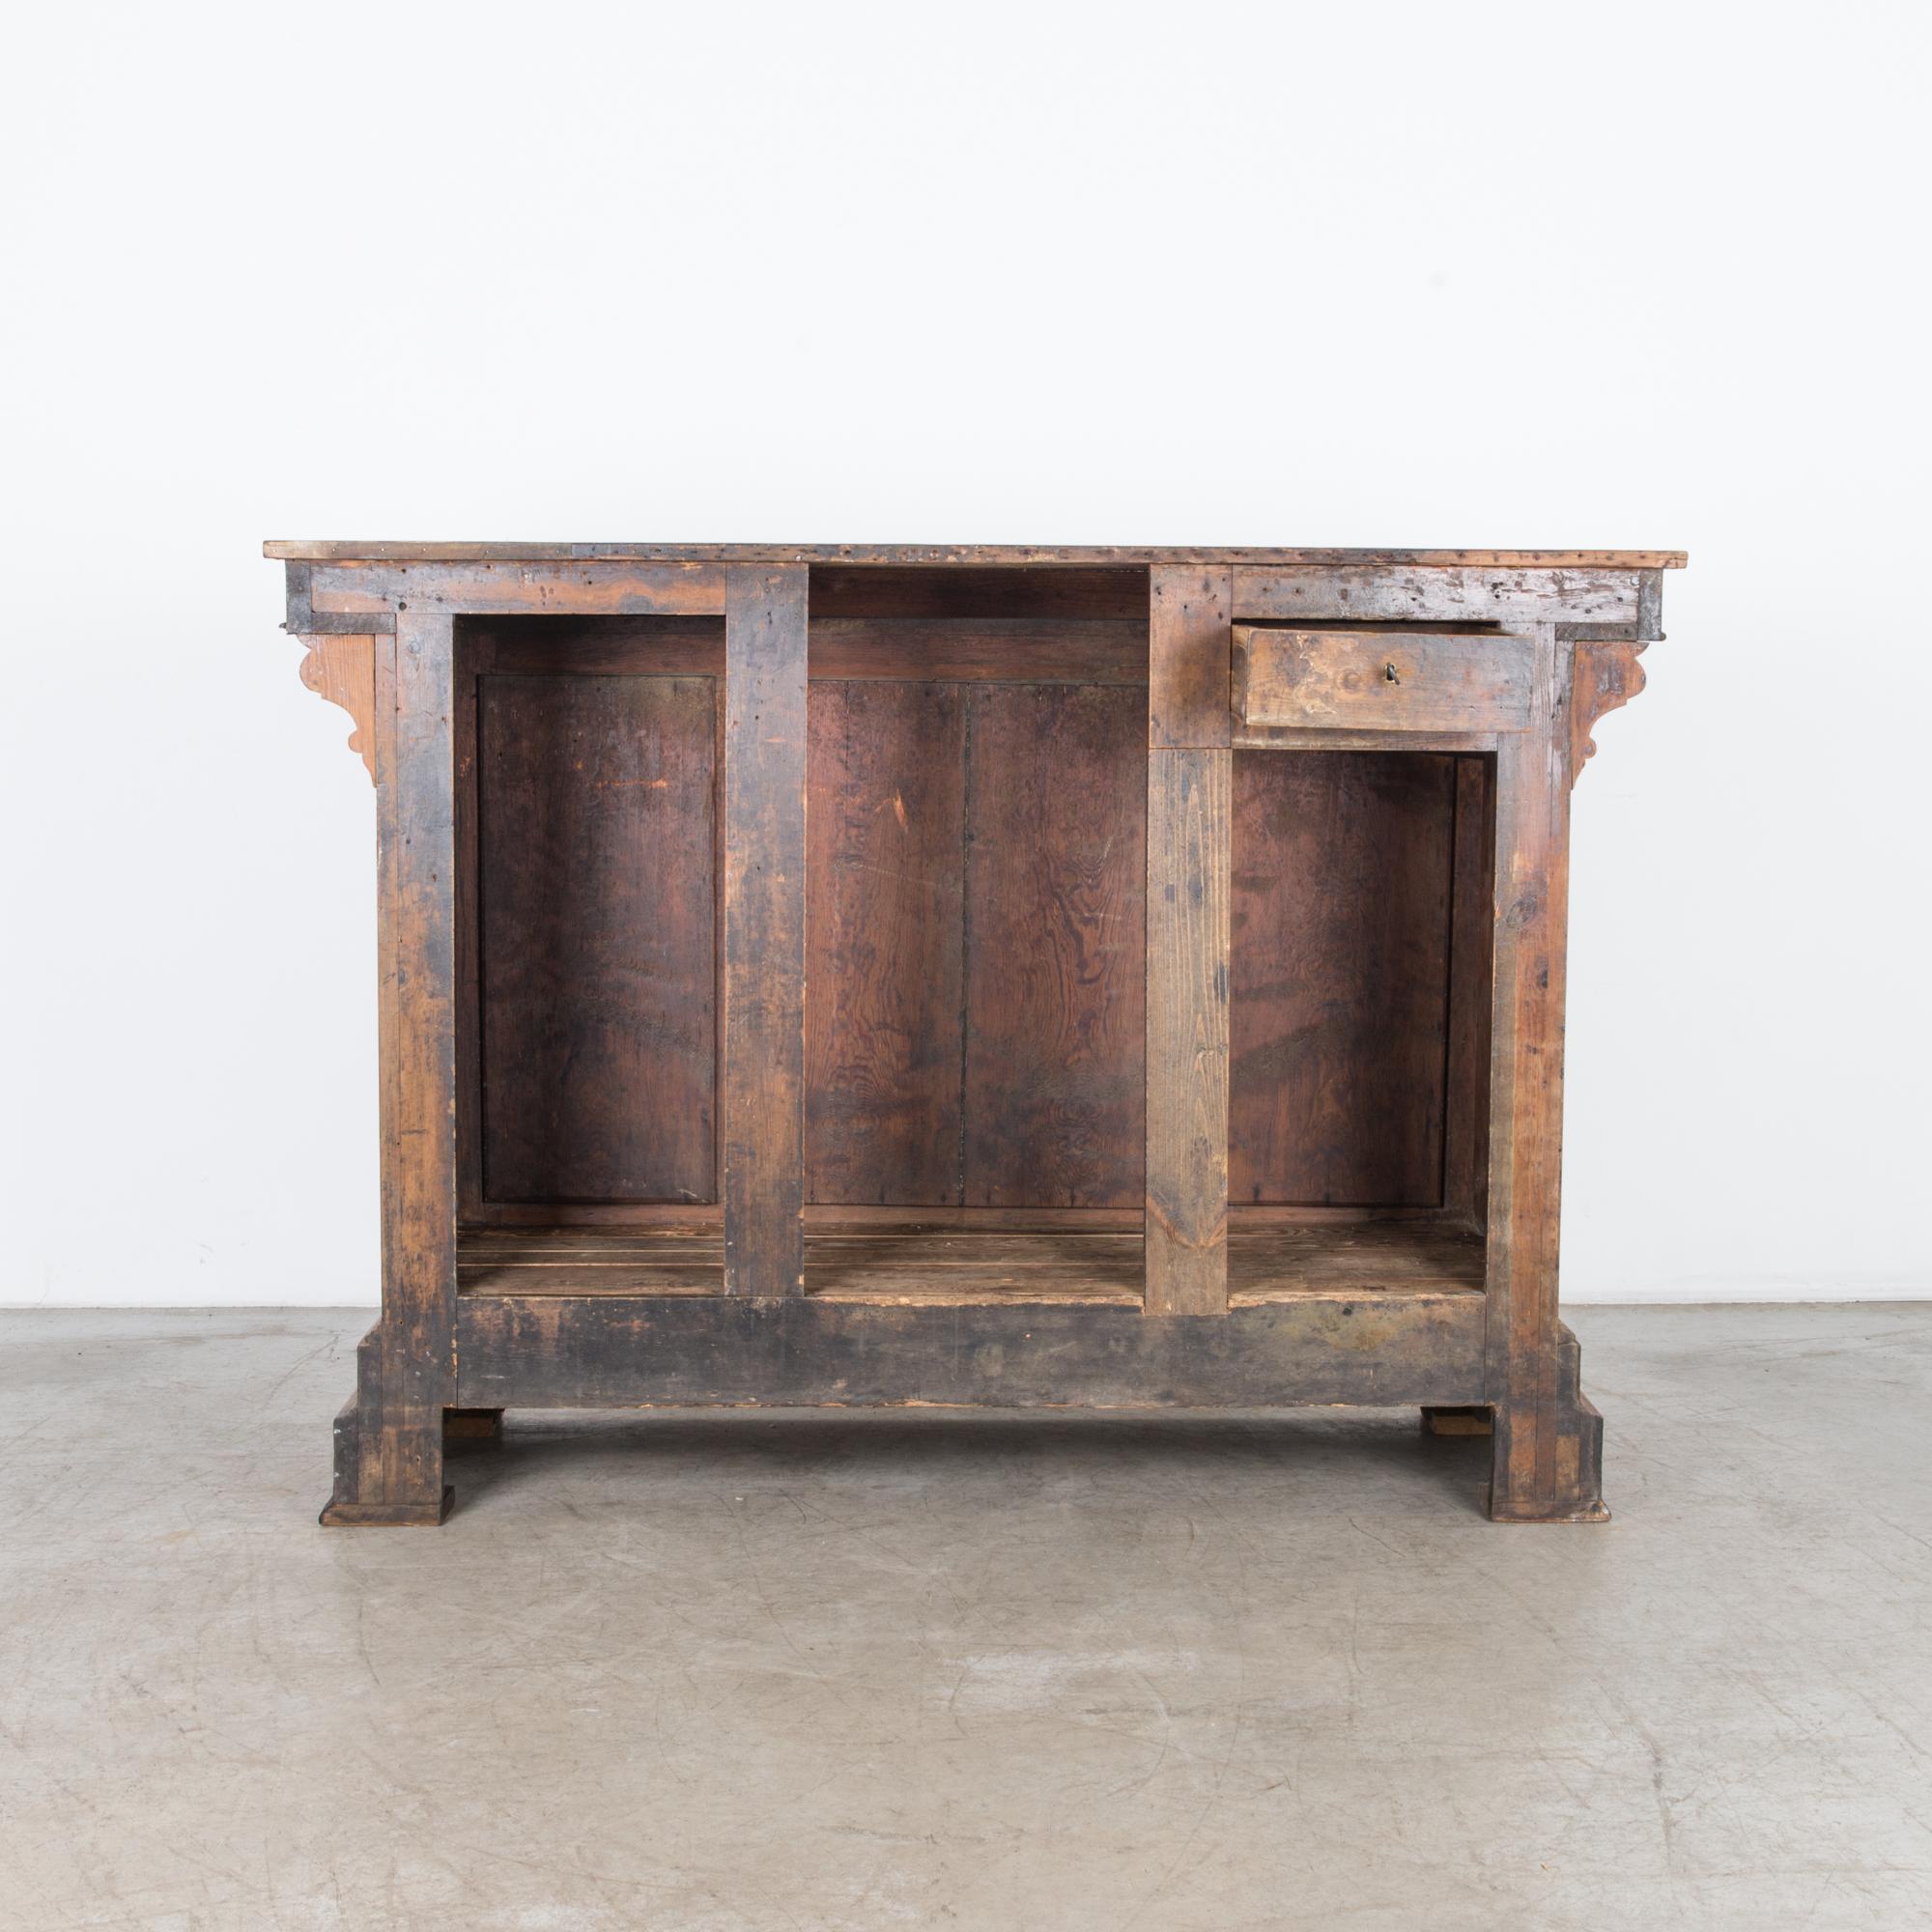 Neoclassical Revival Antique French Shop Counter